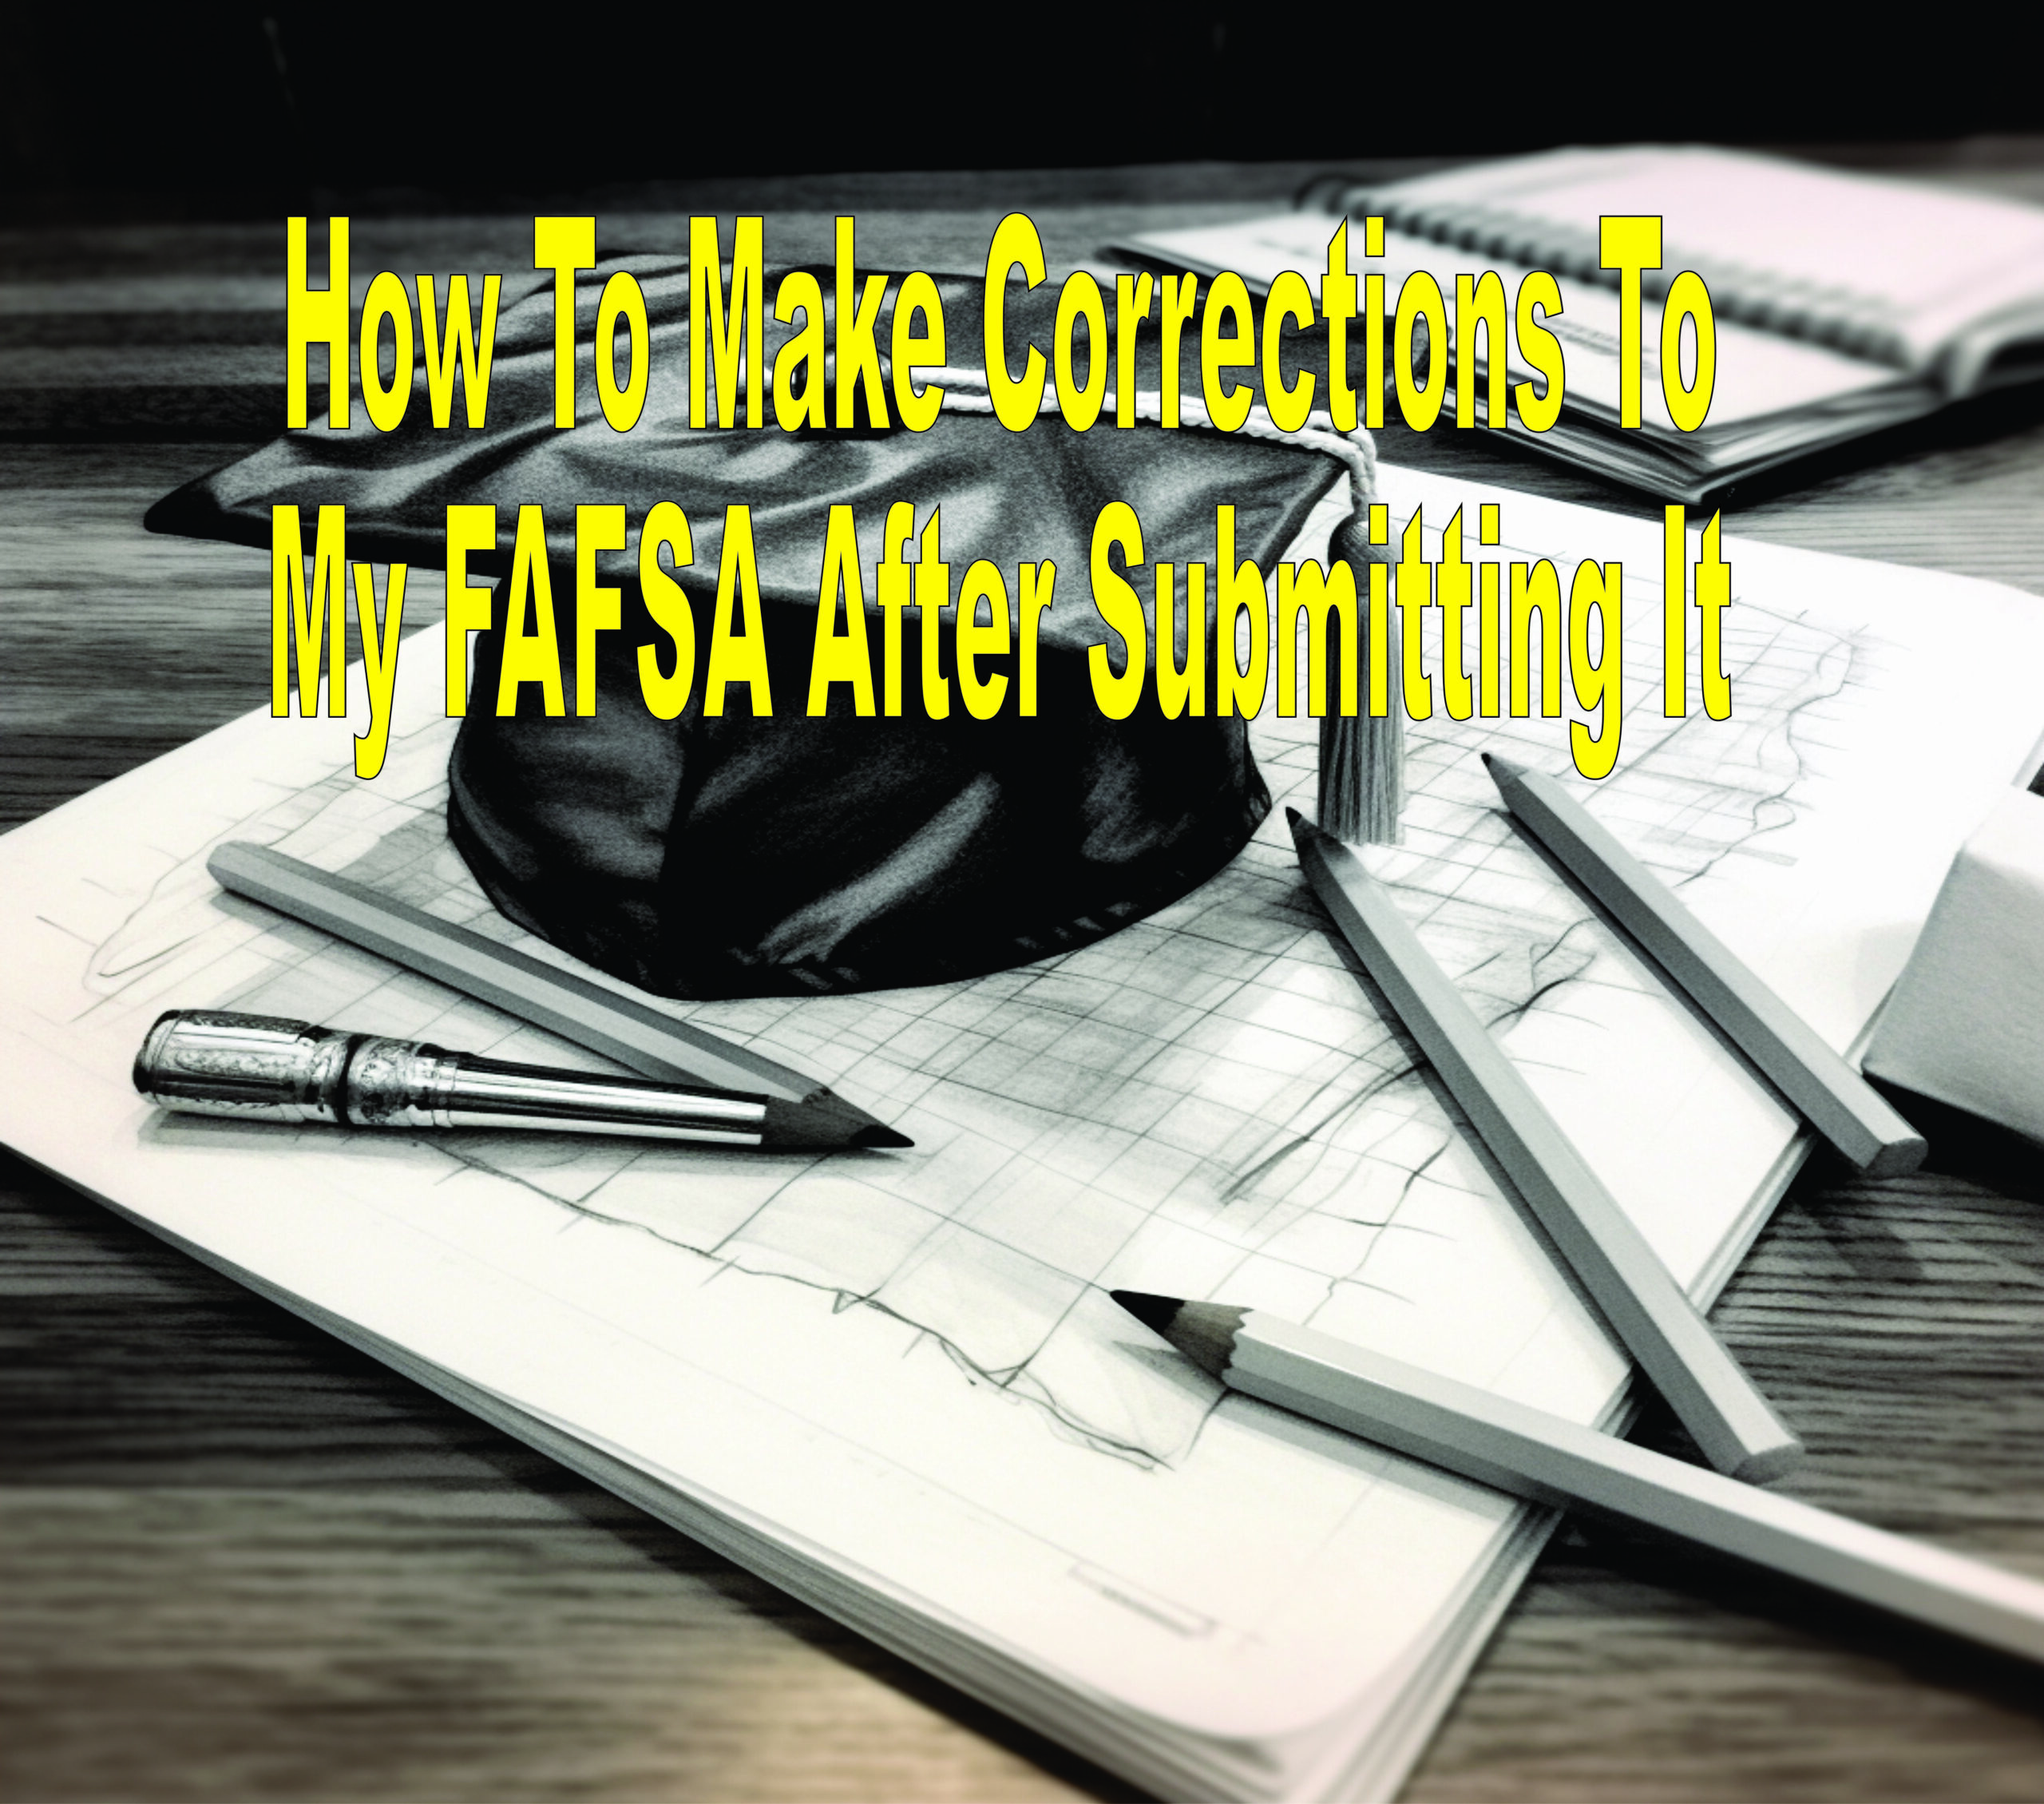 How To Make Corrections To My Fafsa After Submitting It